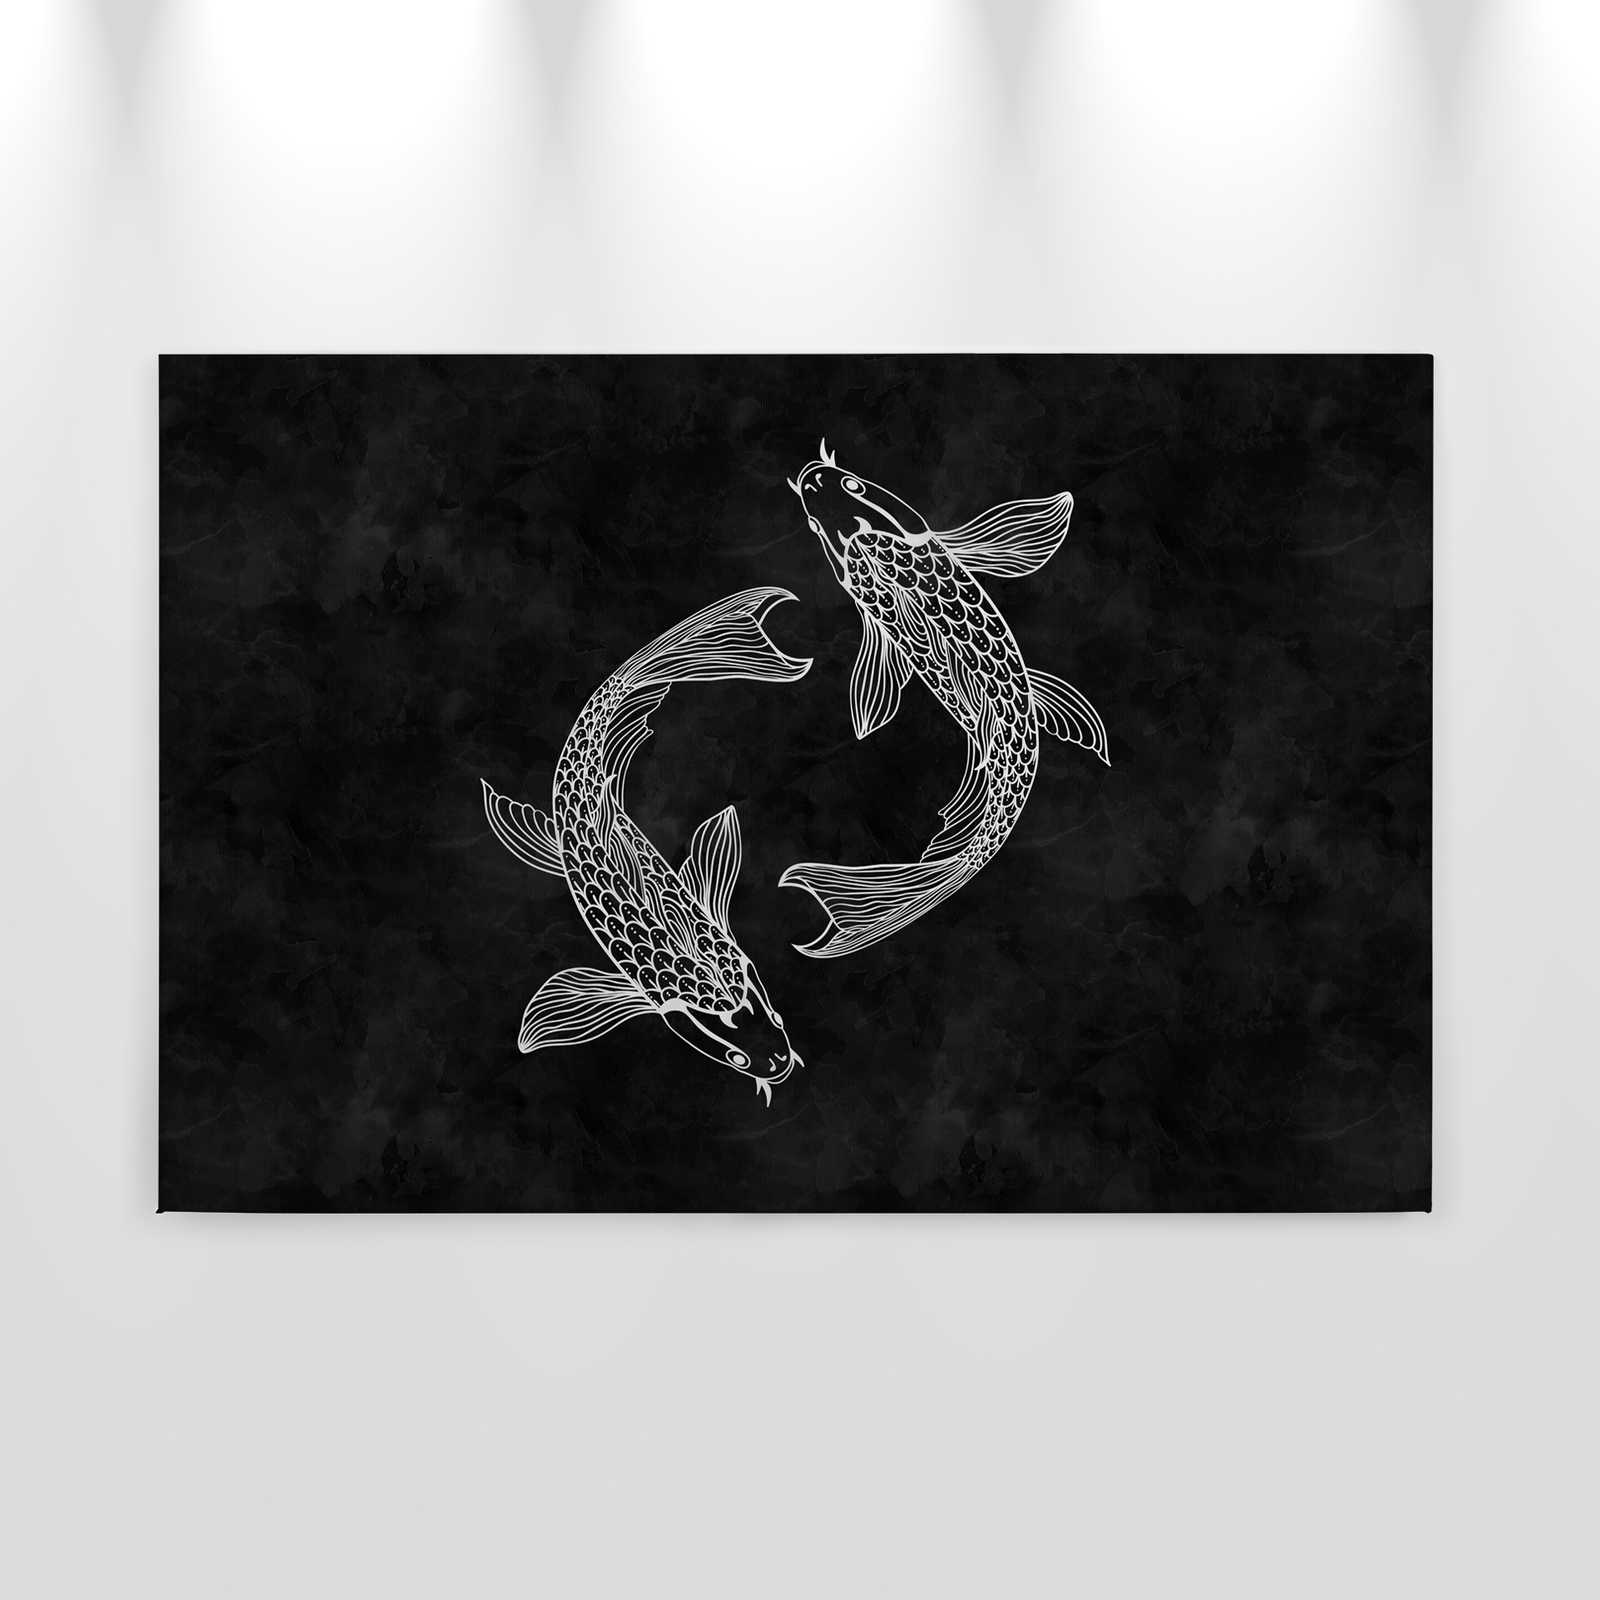             Koi Canvas Painting Black and White in Chalkboard Look - 0.90 m x 0.60 m
        